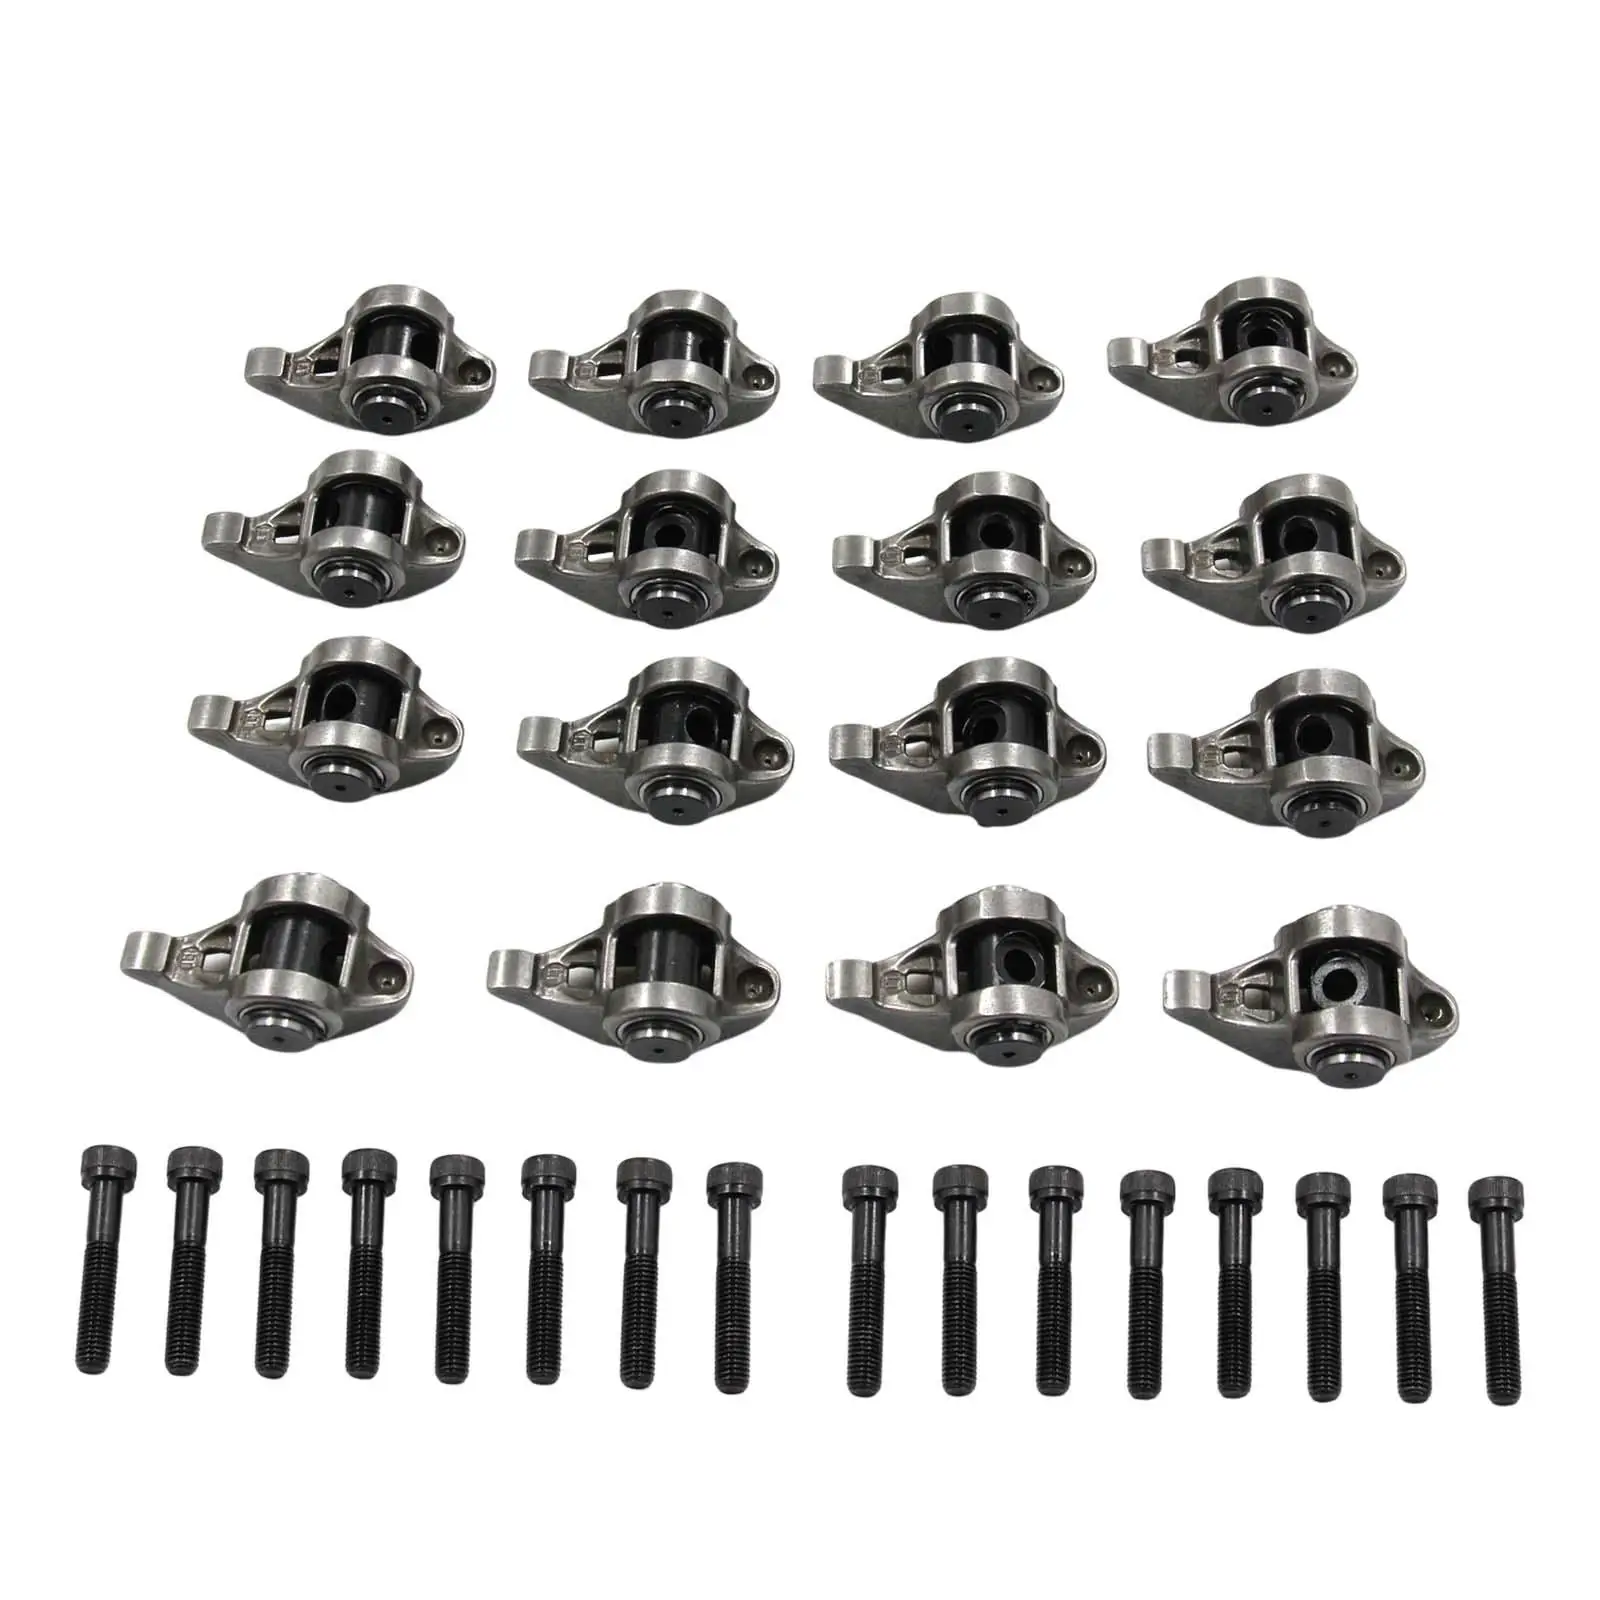 16 Pieces Rocker Arms and Bolts with Trunion Kit Installed 10214664 Accessory for Chevrolet LS1 LS2 LS3 LS6 LM7 L59 LM4 L33